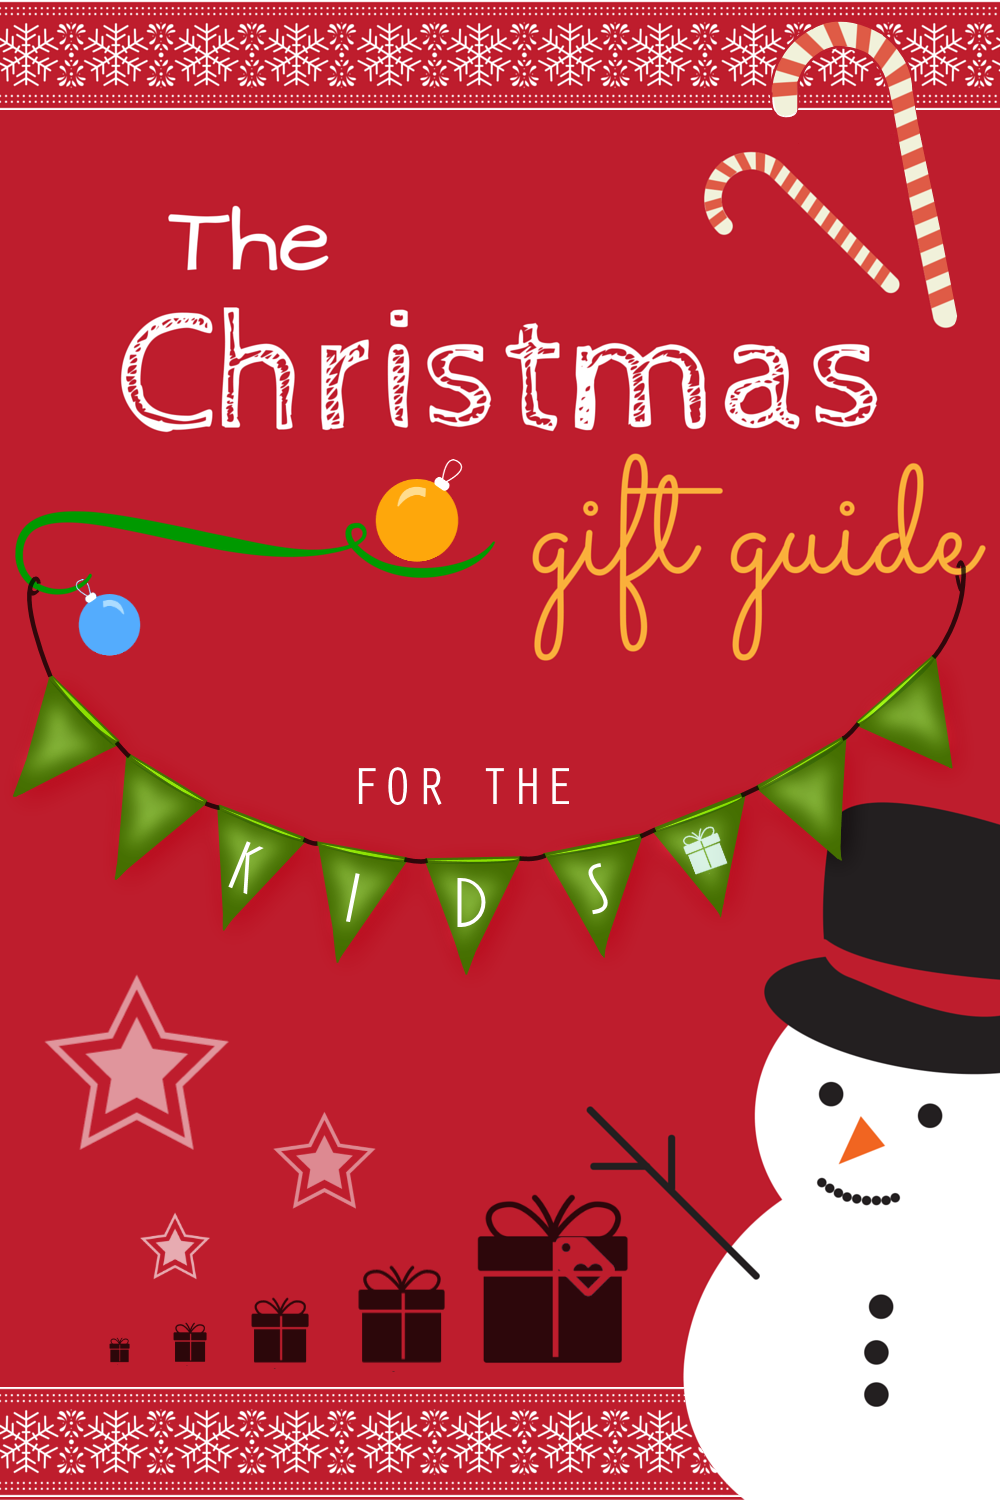 Christmas Gift Guide For The Kids